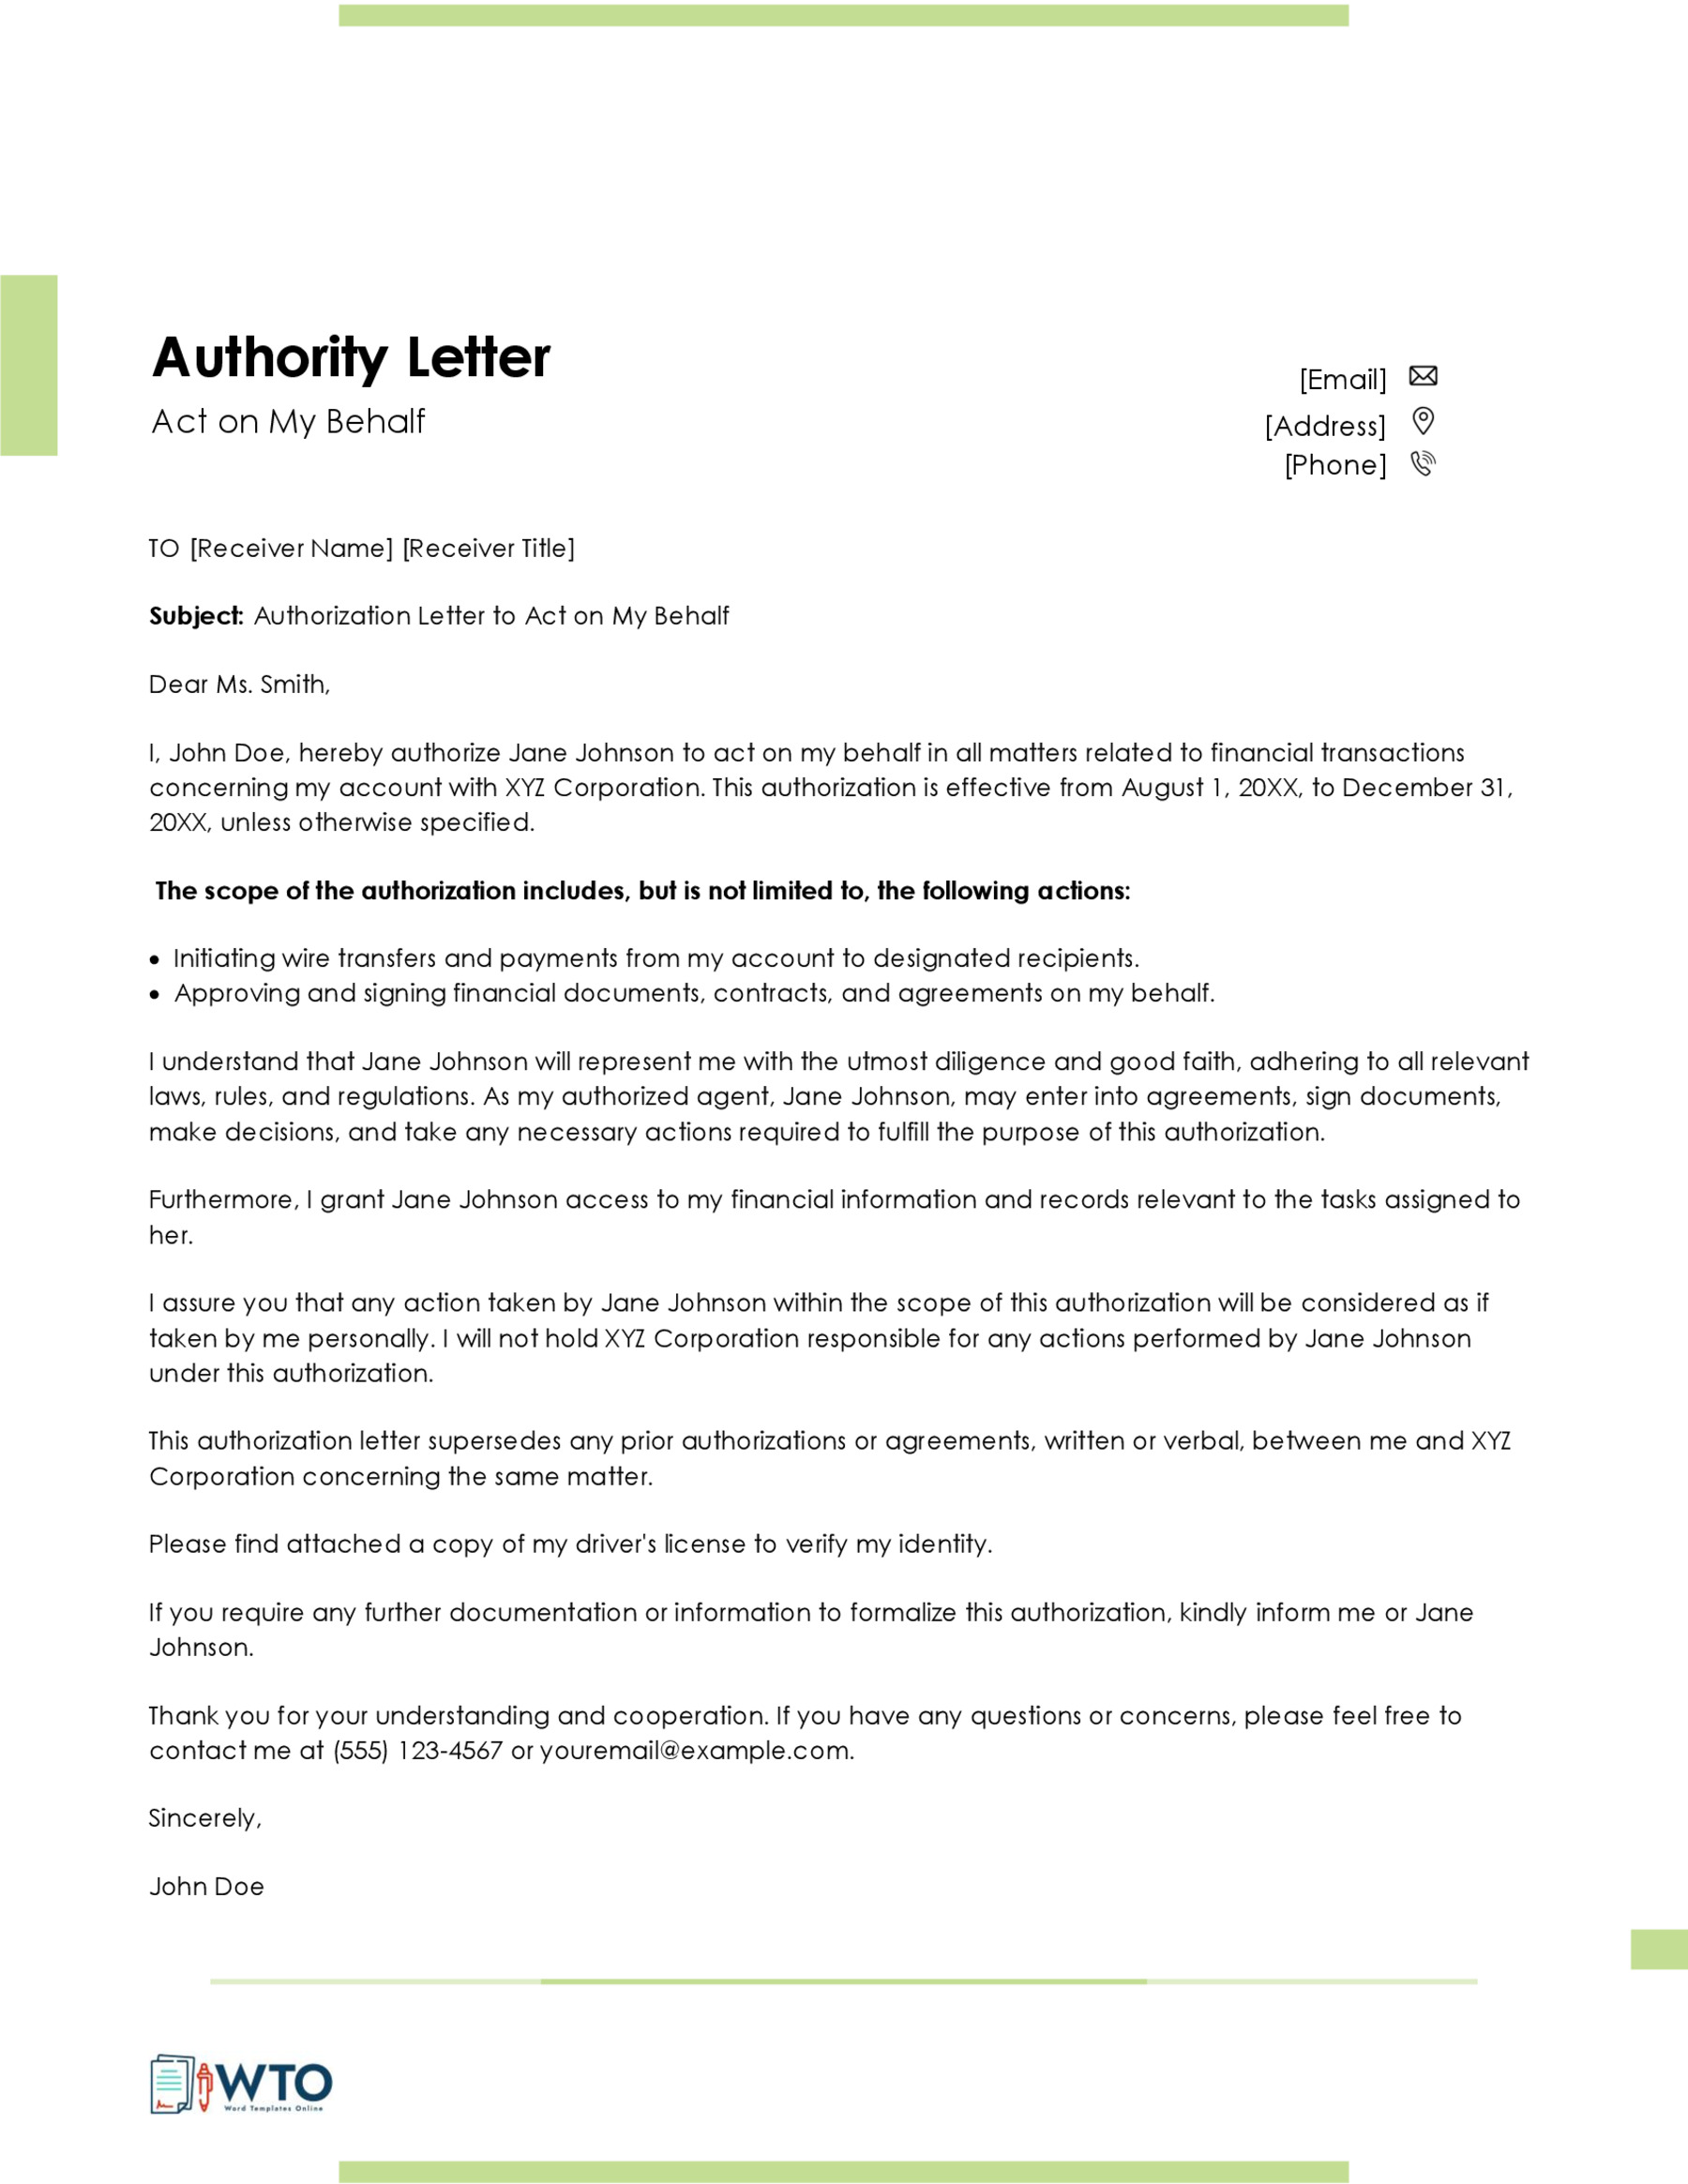 Free Downloadable Act on Behalf Authorization Letter Sample 02 for Word Document